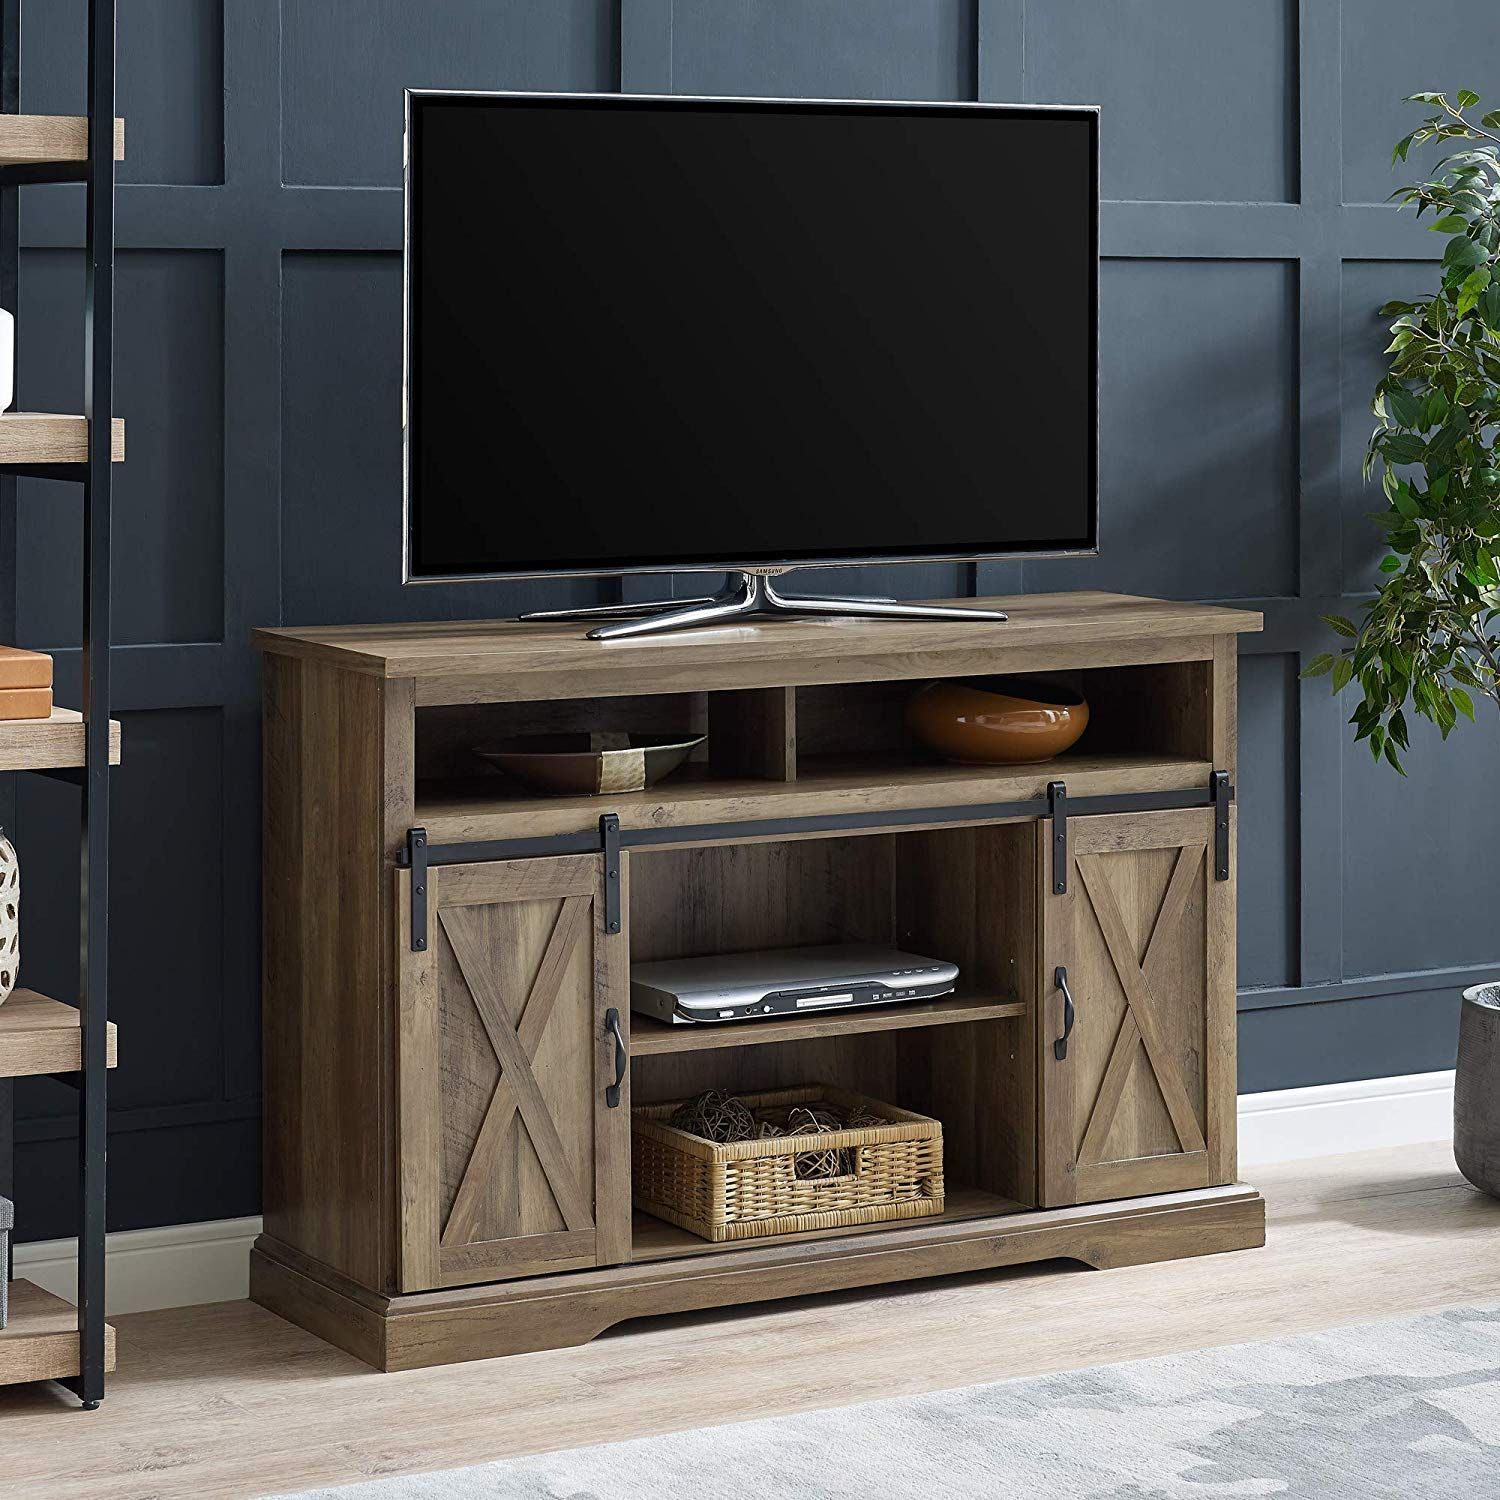 Farmhouse Tv Stands & Rustic Tv Stands – Farmhouse Goals | Farmhouse Tv Regarding Modern Farmhouse Rustic Tv Stands (View 8 of 20)